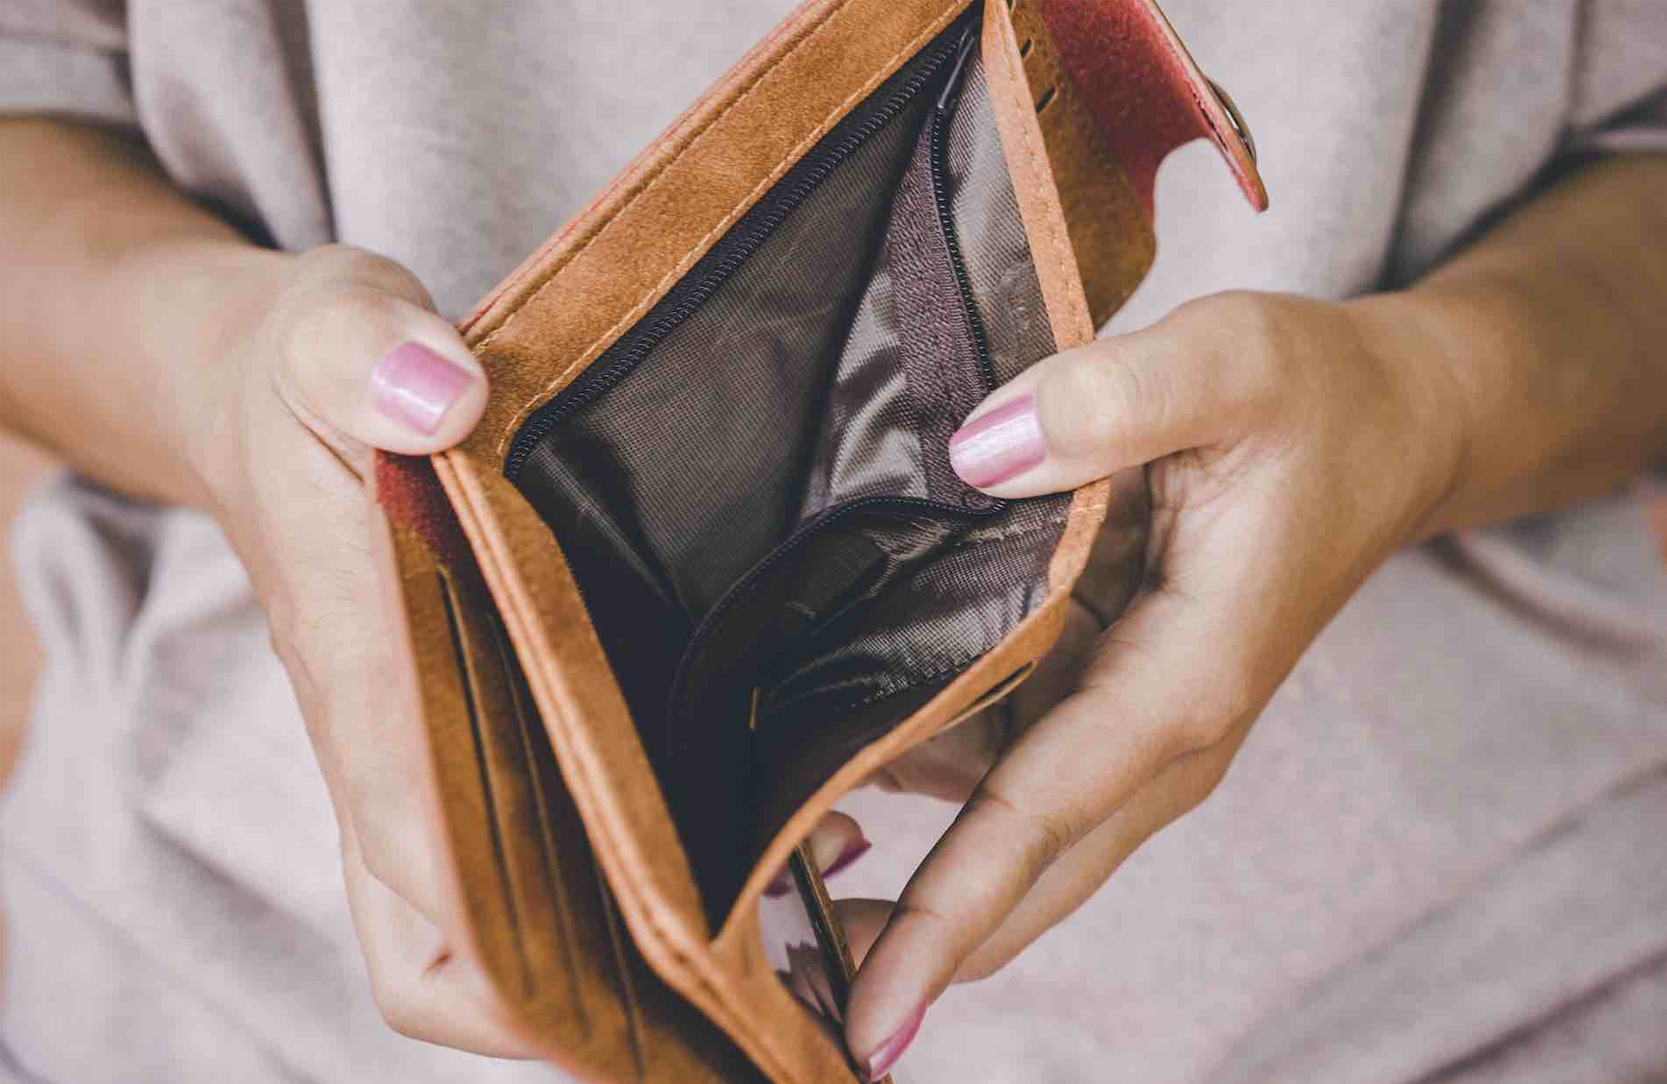 The 5 Habits That Are Keeping You Broke The Organized Money